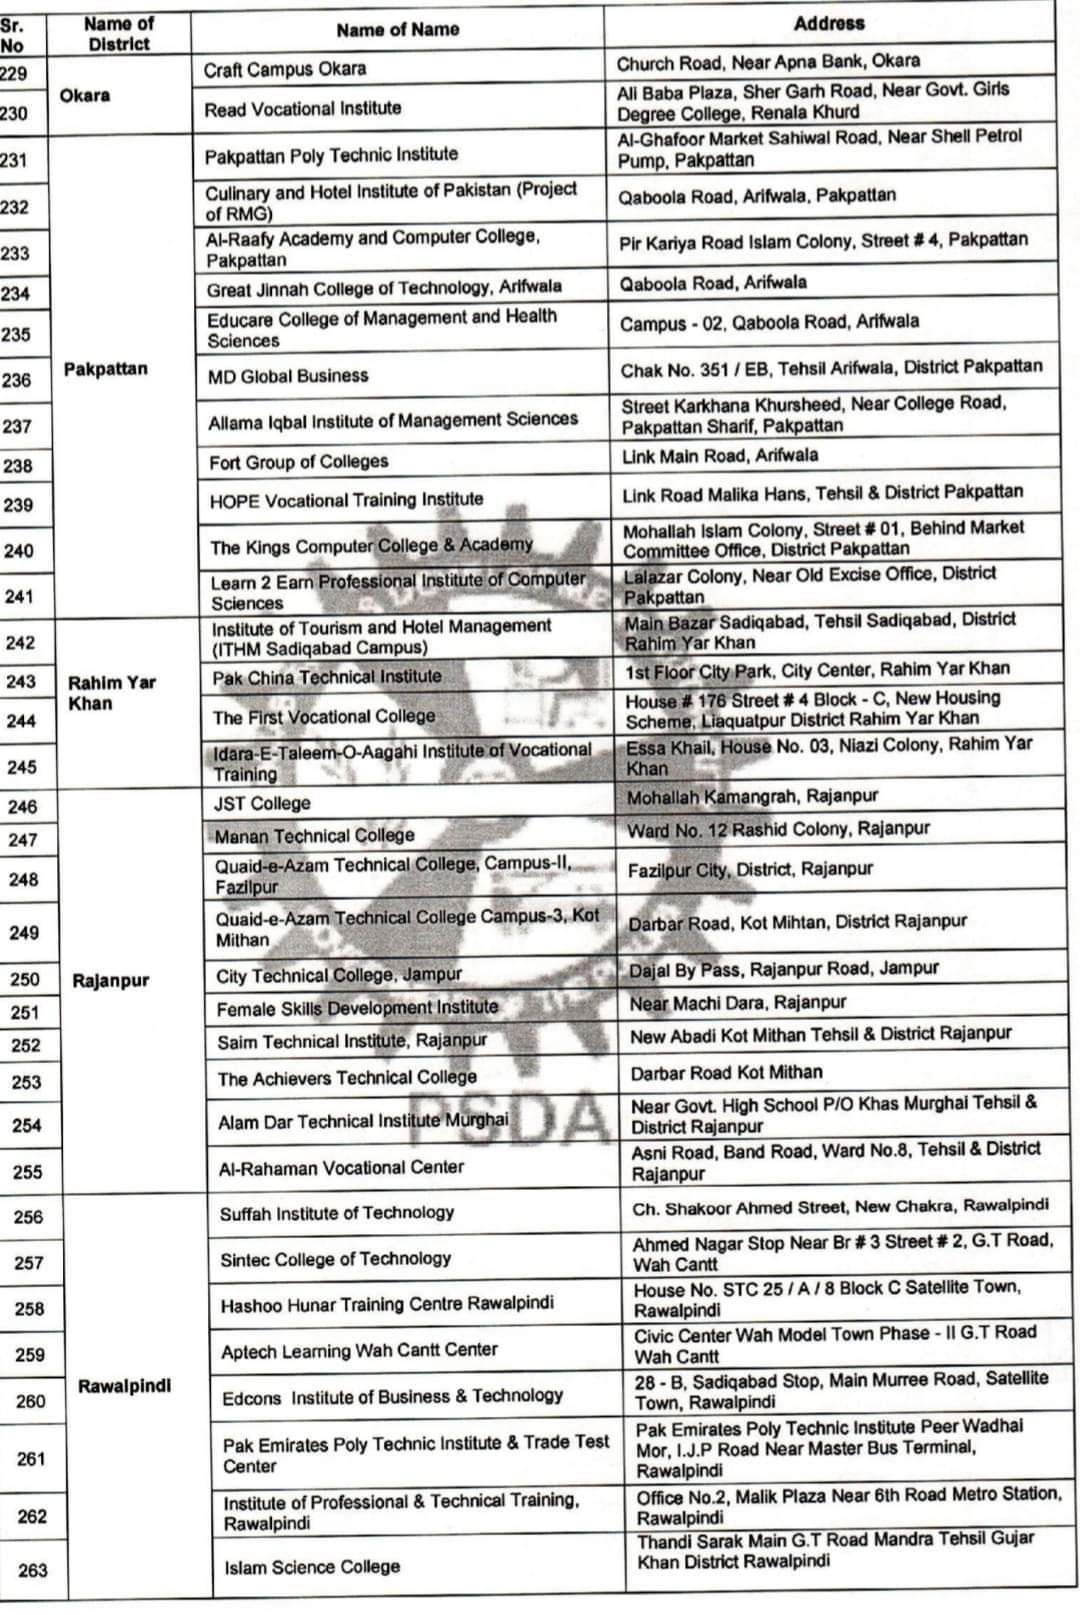 List of Approved Institutes approved by PSDA for Computer Certificate, ppsc jobs, latest ppsc jobs, ppsc patwari jobs, canal patwari jobs 2023,